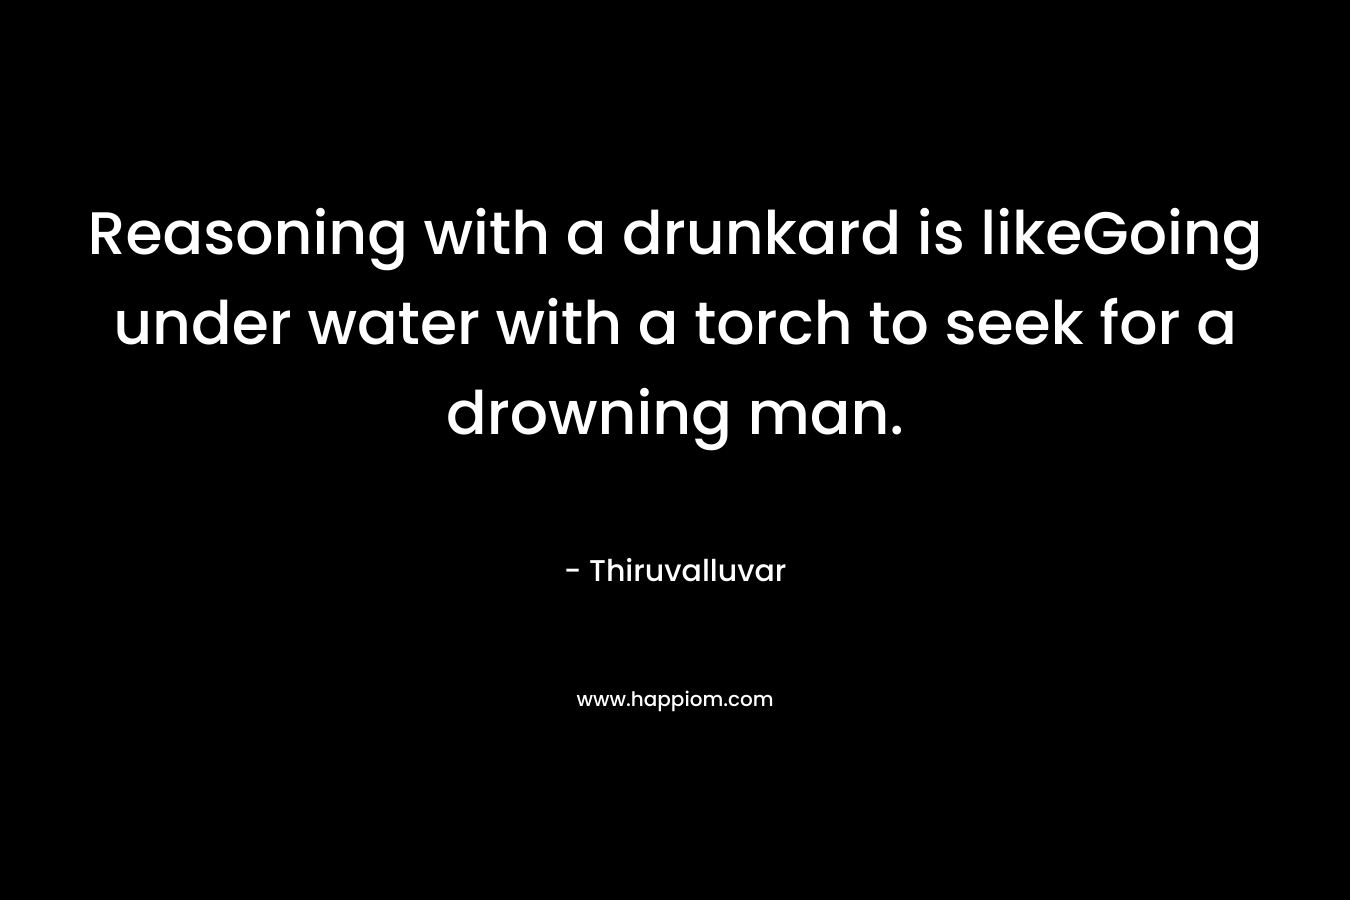 Reasoning with a drunkard is likeGoing under water with a torch to seek for a drowning man.